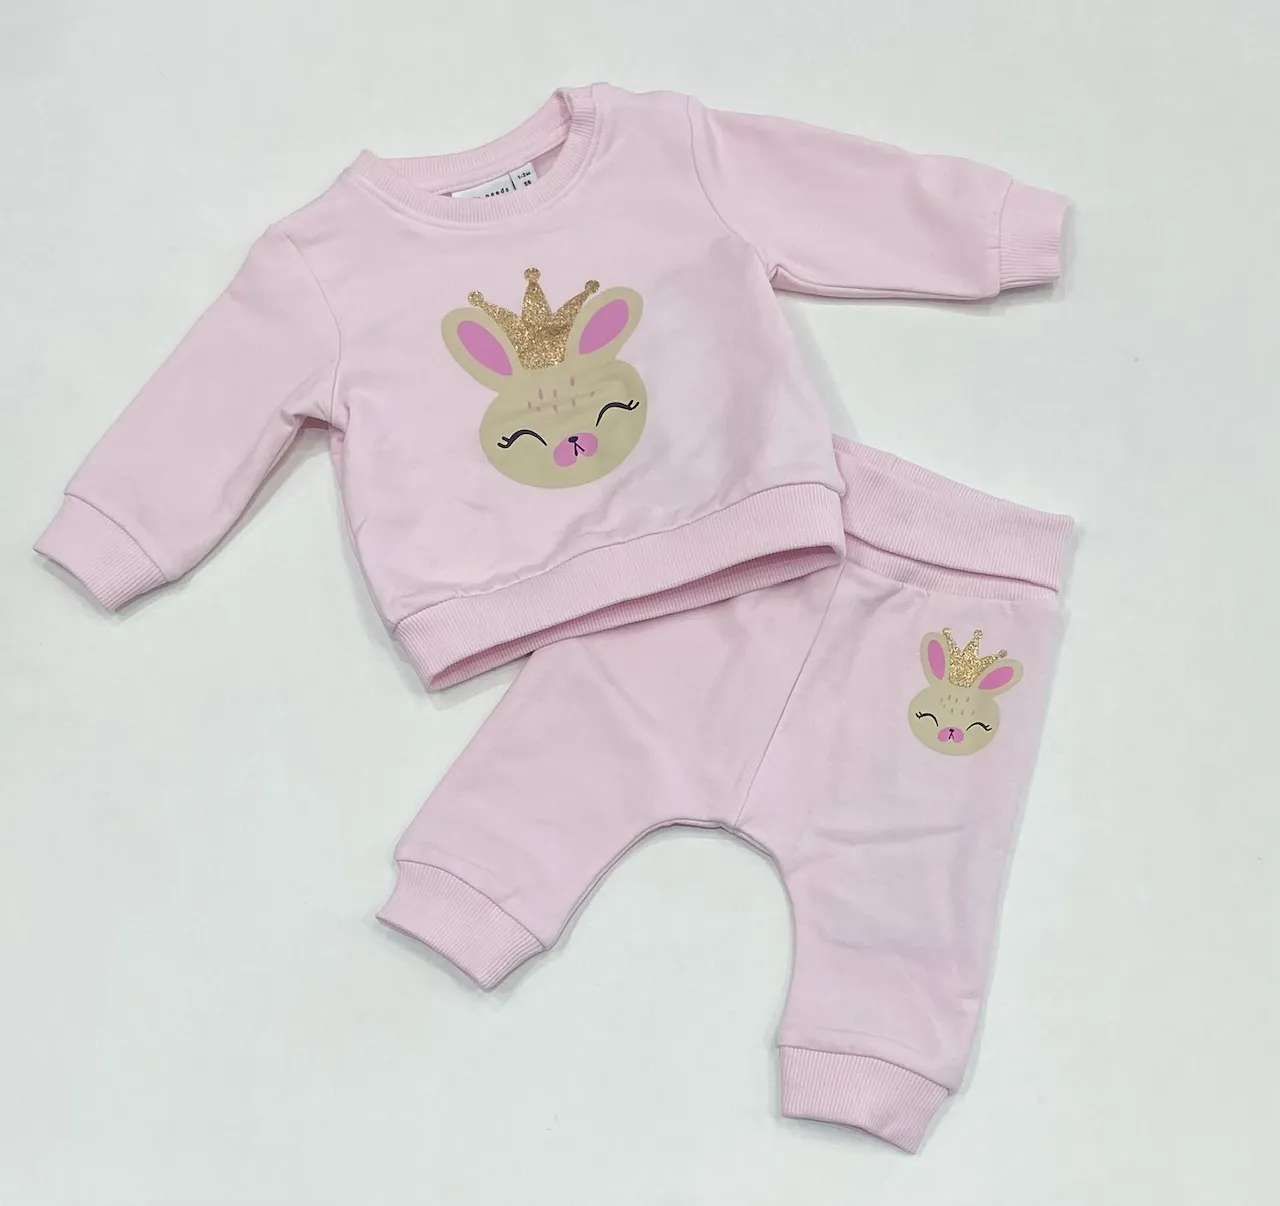 NAME IT nbf vrillie ls sweat pink bunny ss24 13226050